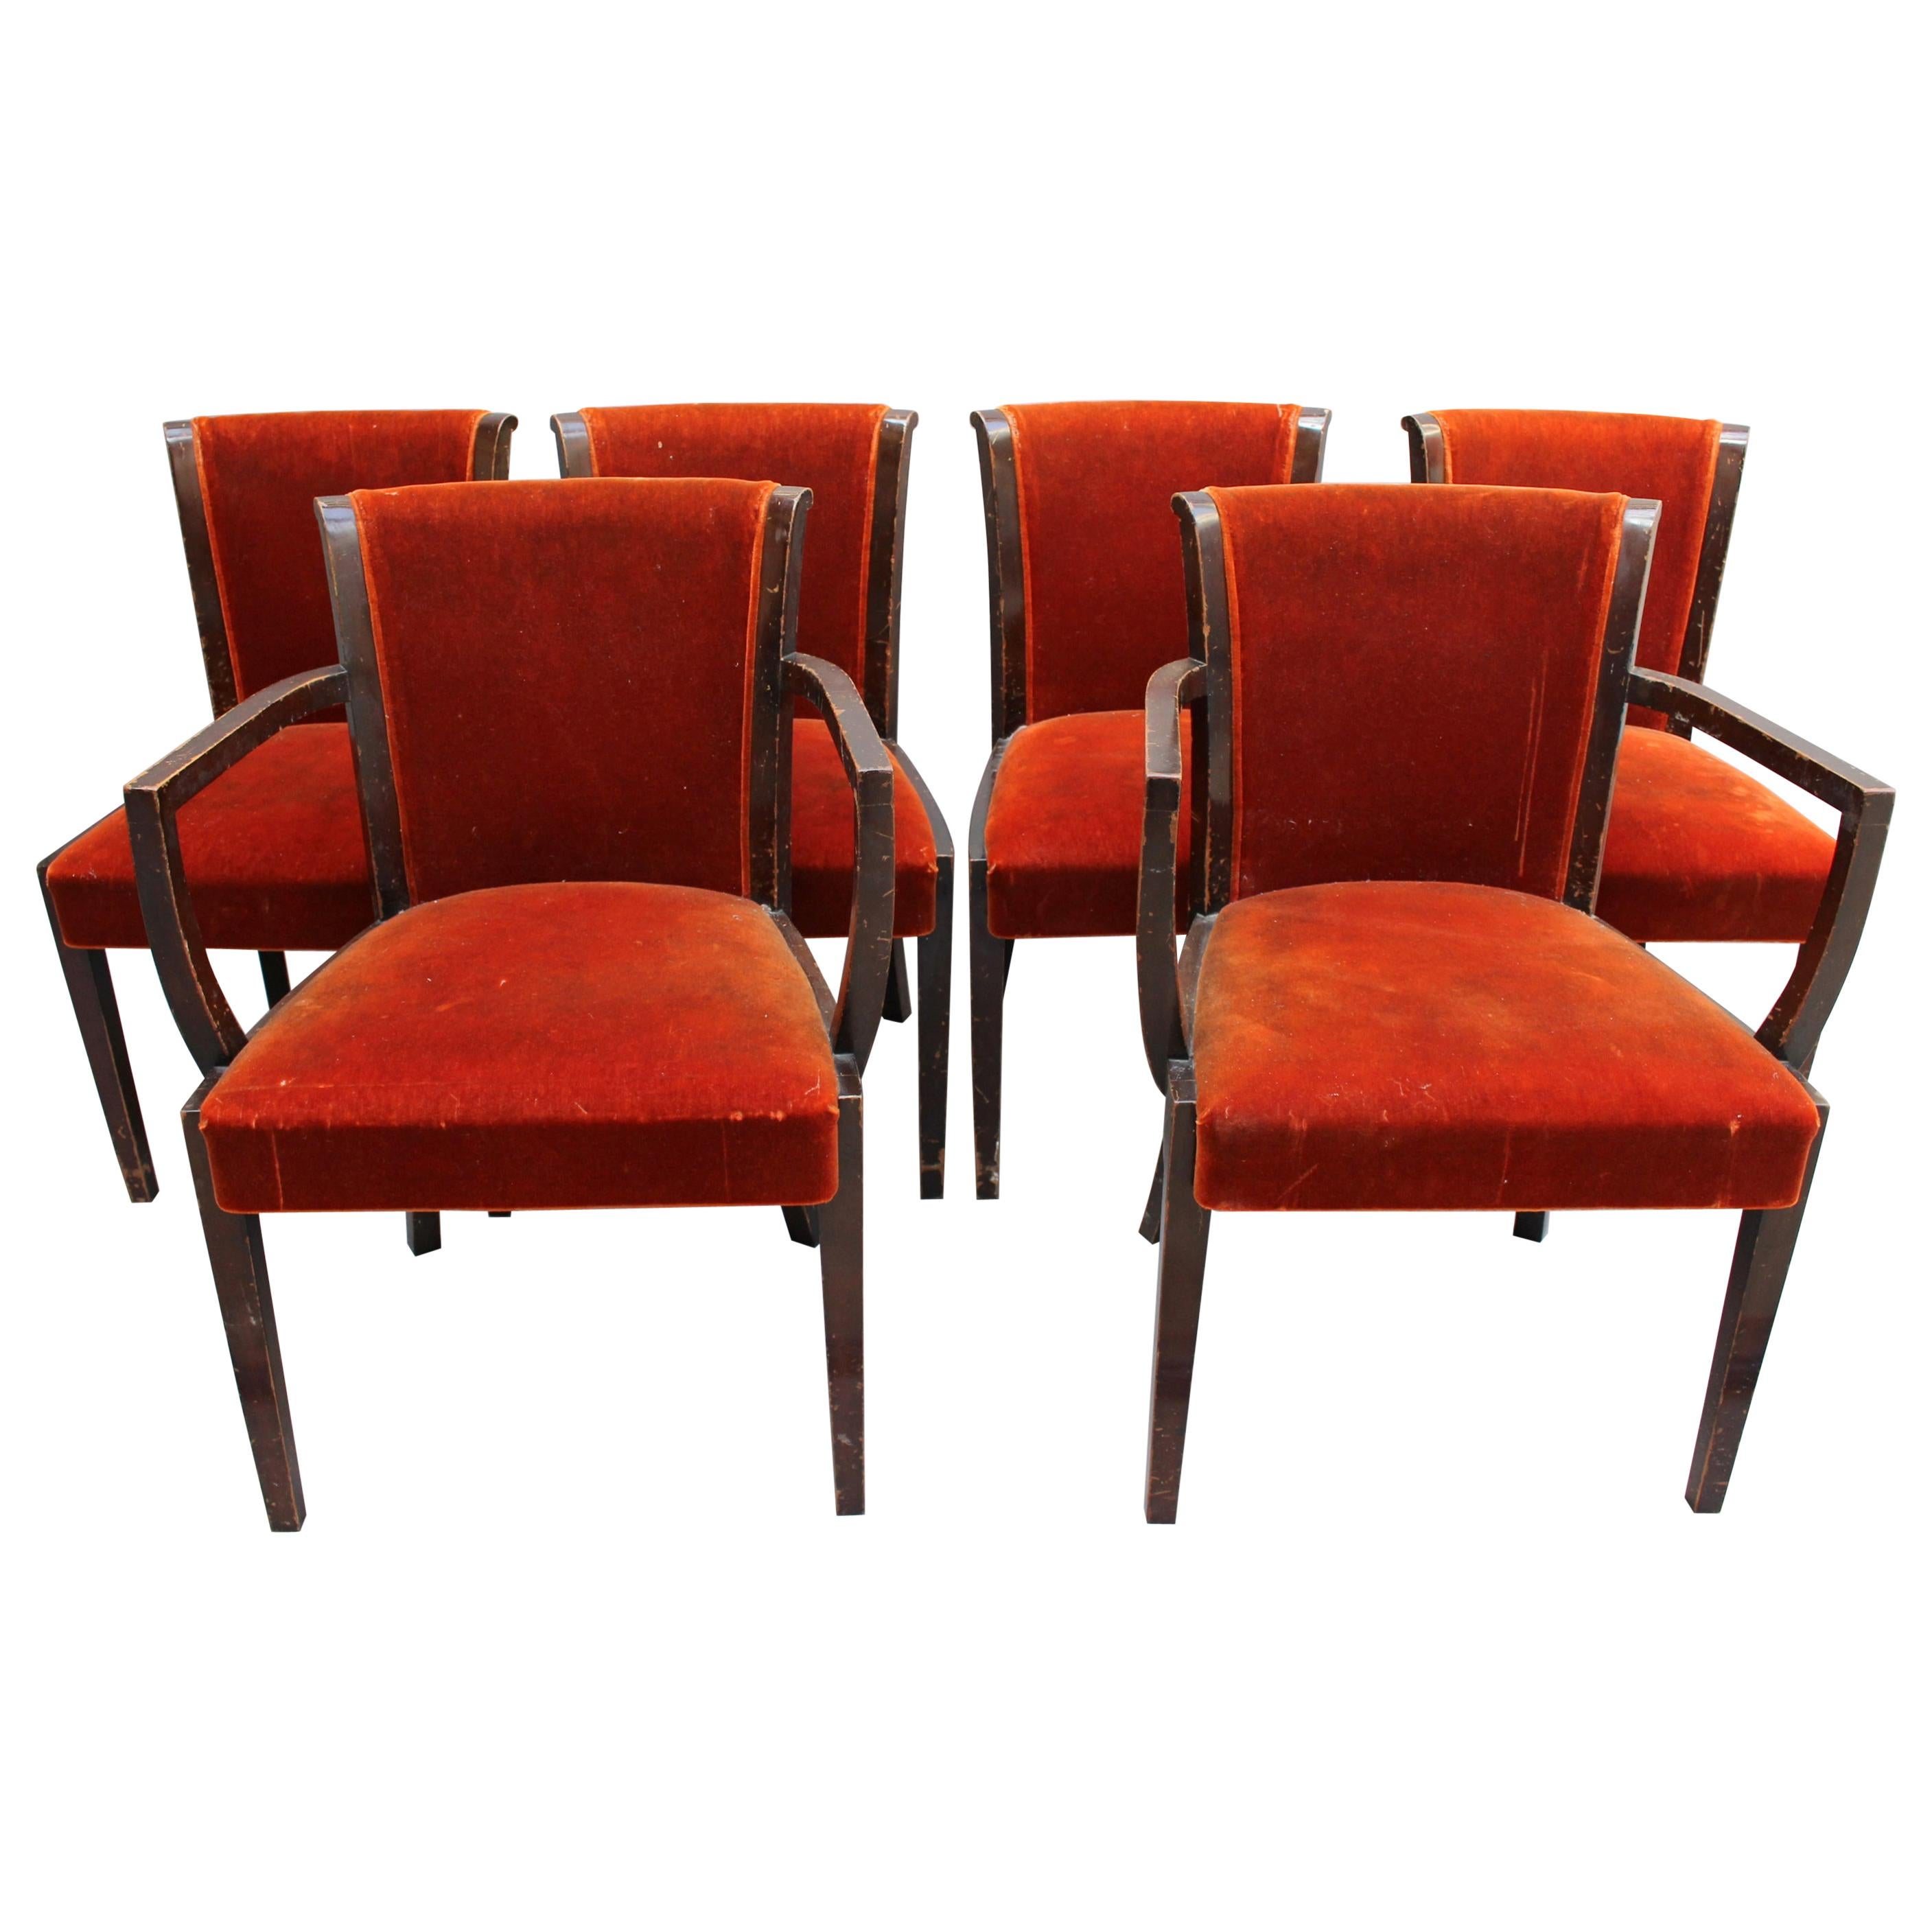 Set of 6 Fine Belgium Art Deco Chairs by De Coene (4 Side and 2 Arm)